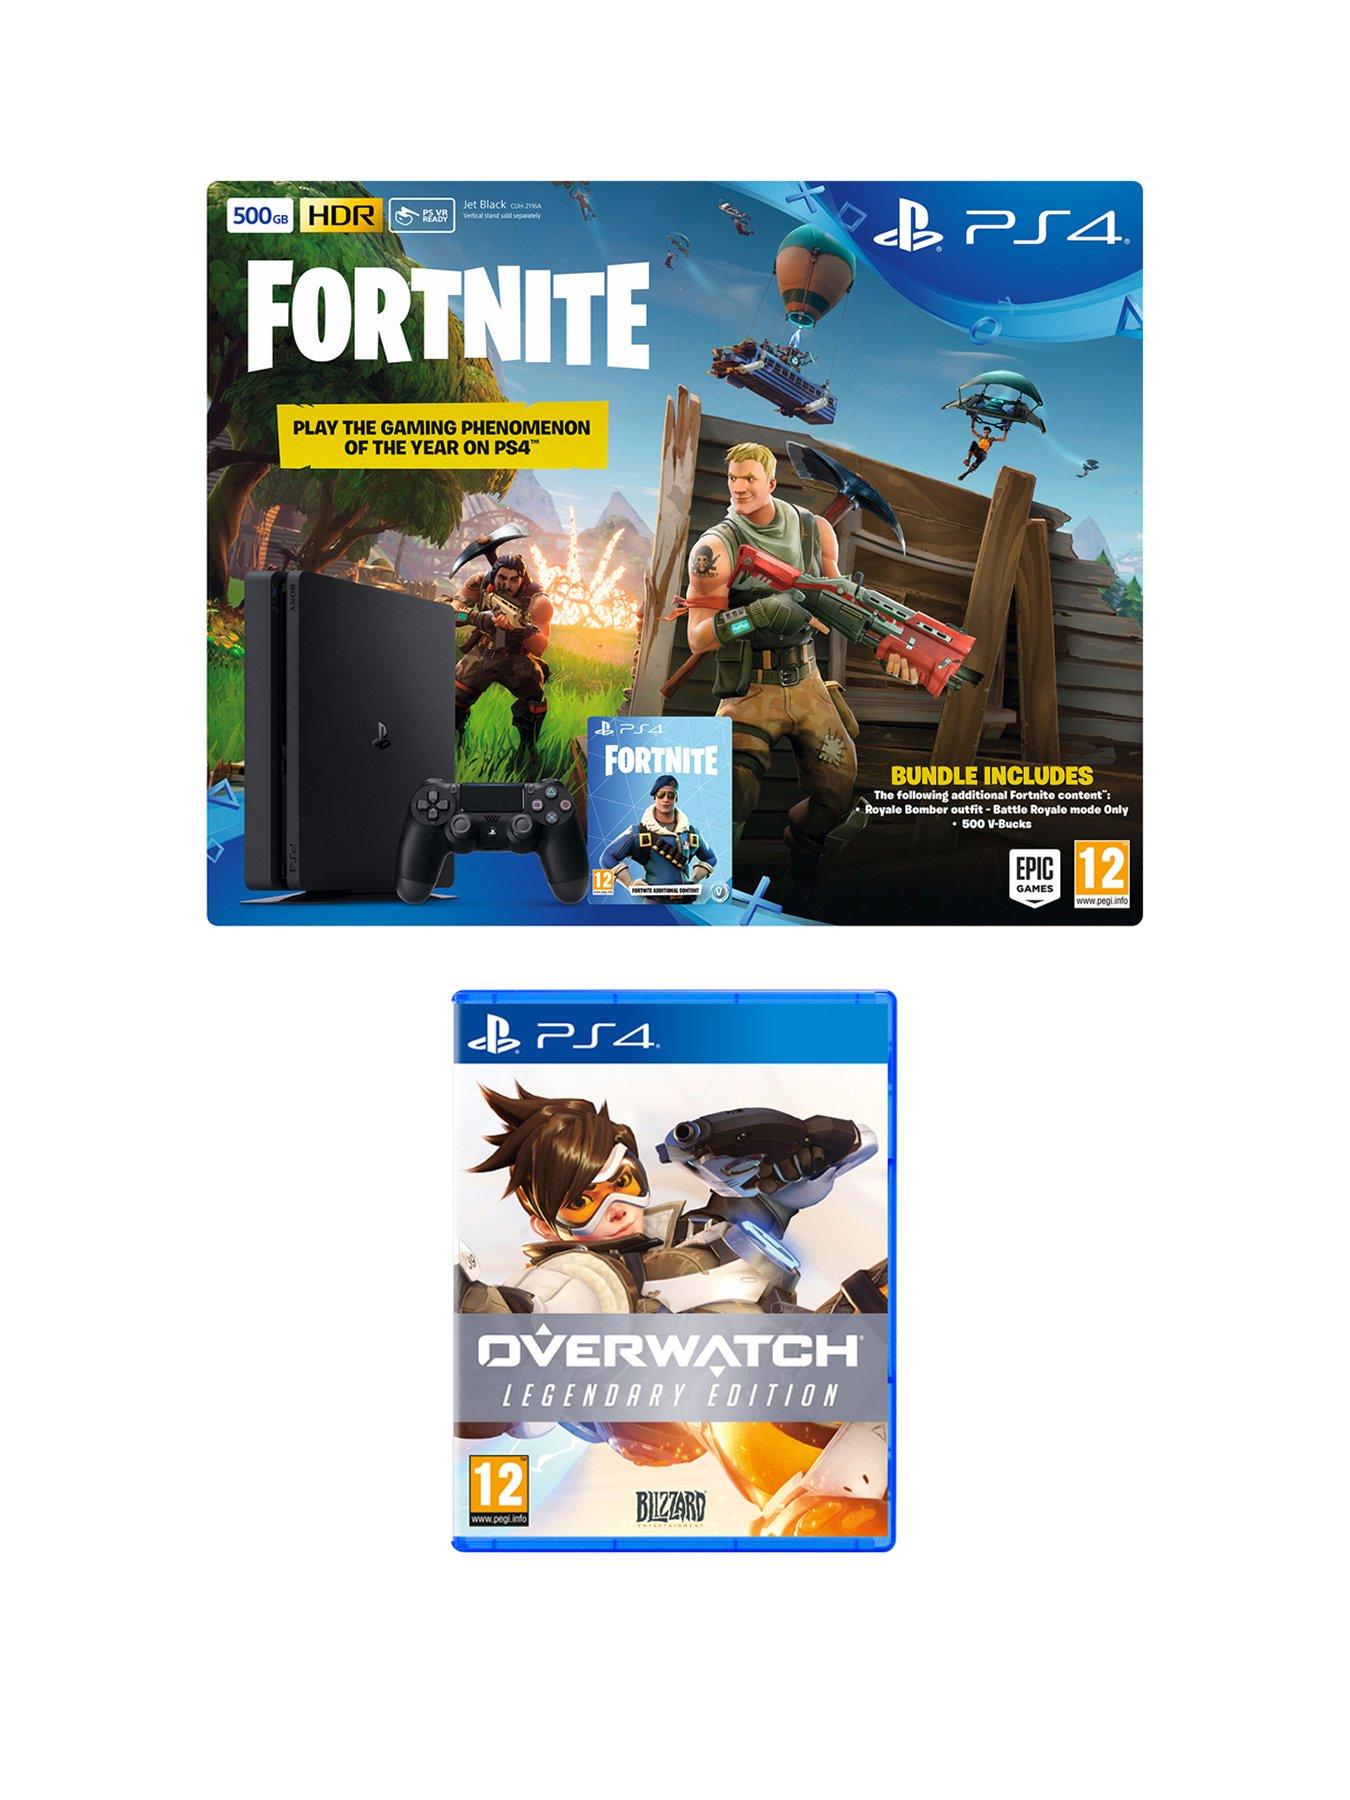 playstation 4 fortnite ps4 500gb bundle with overwatch legendary edition plus optional extras - fortnite ps4 no ps plus